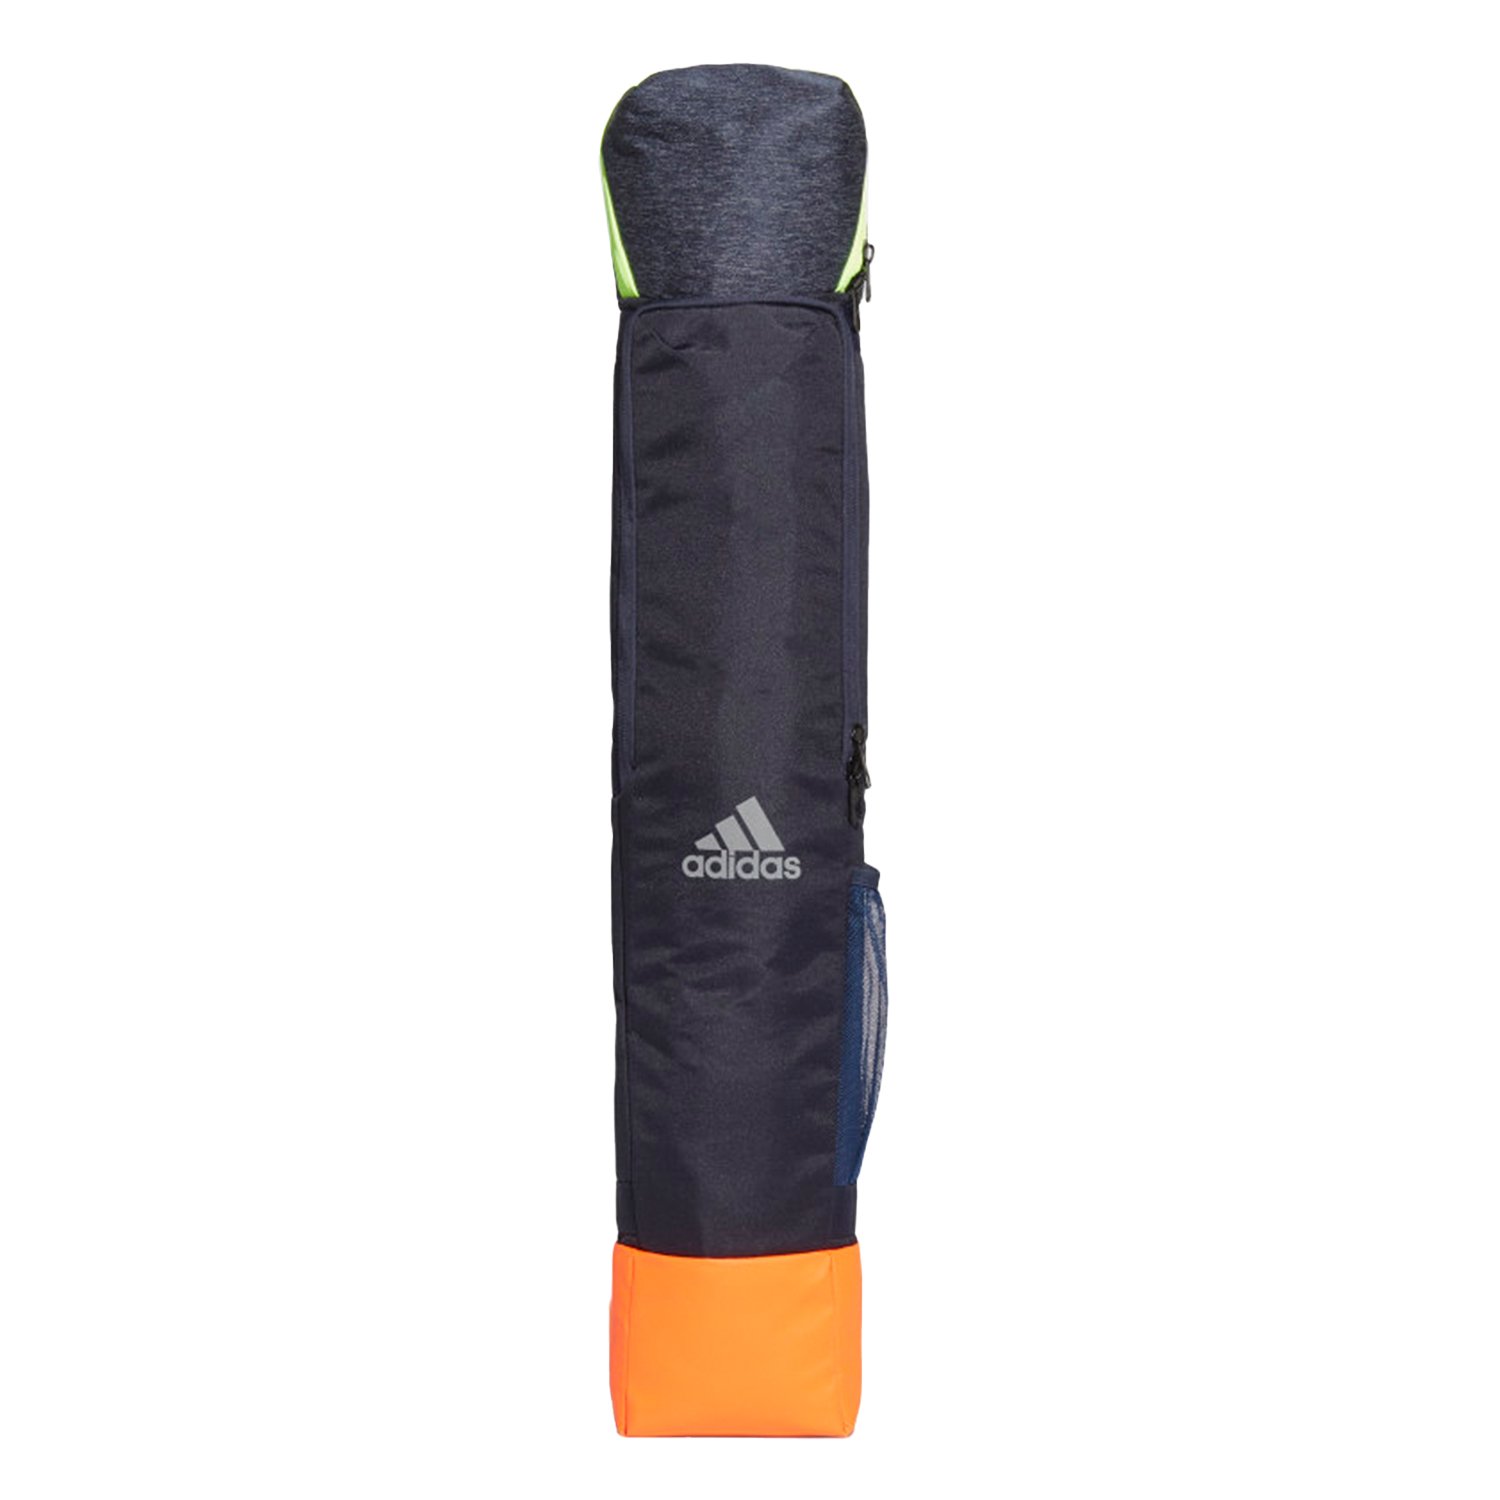 VS2 Stick Bag (21) Hockey Stick Bags | Just Adidas 2021 HOCLEARBAG